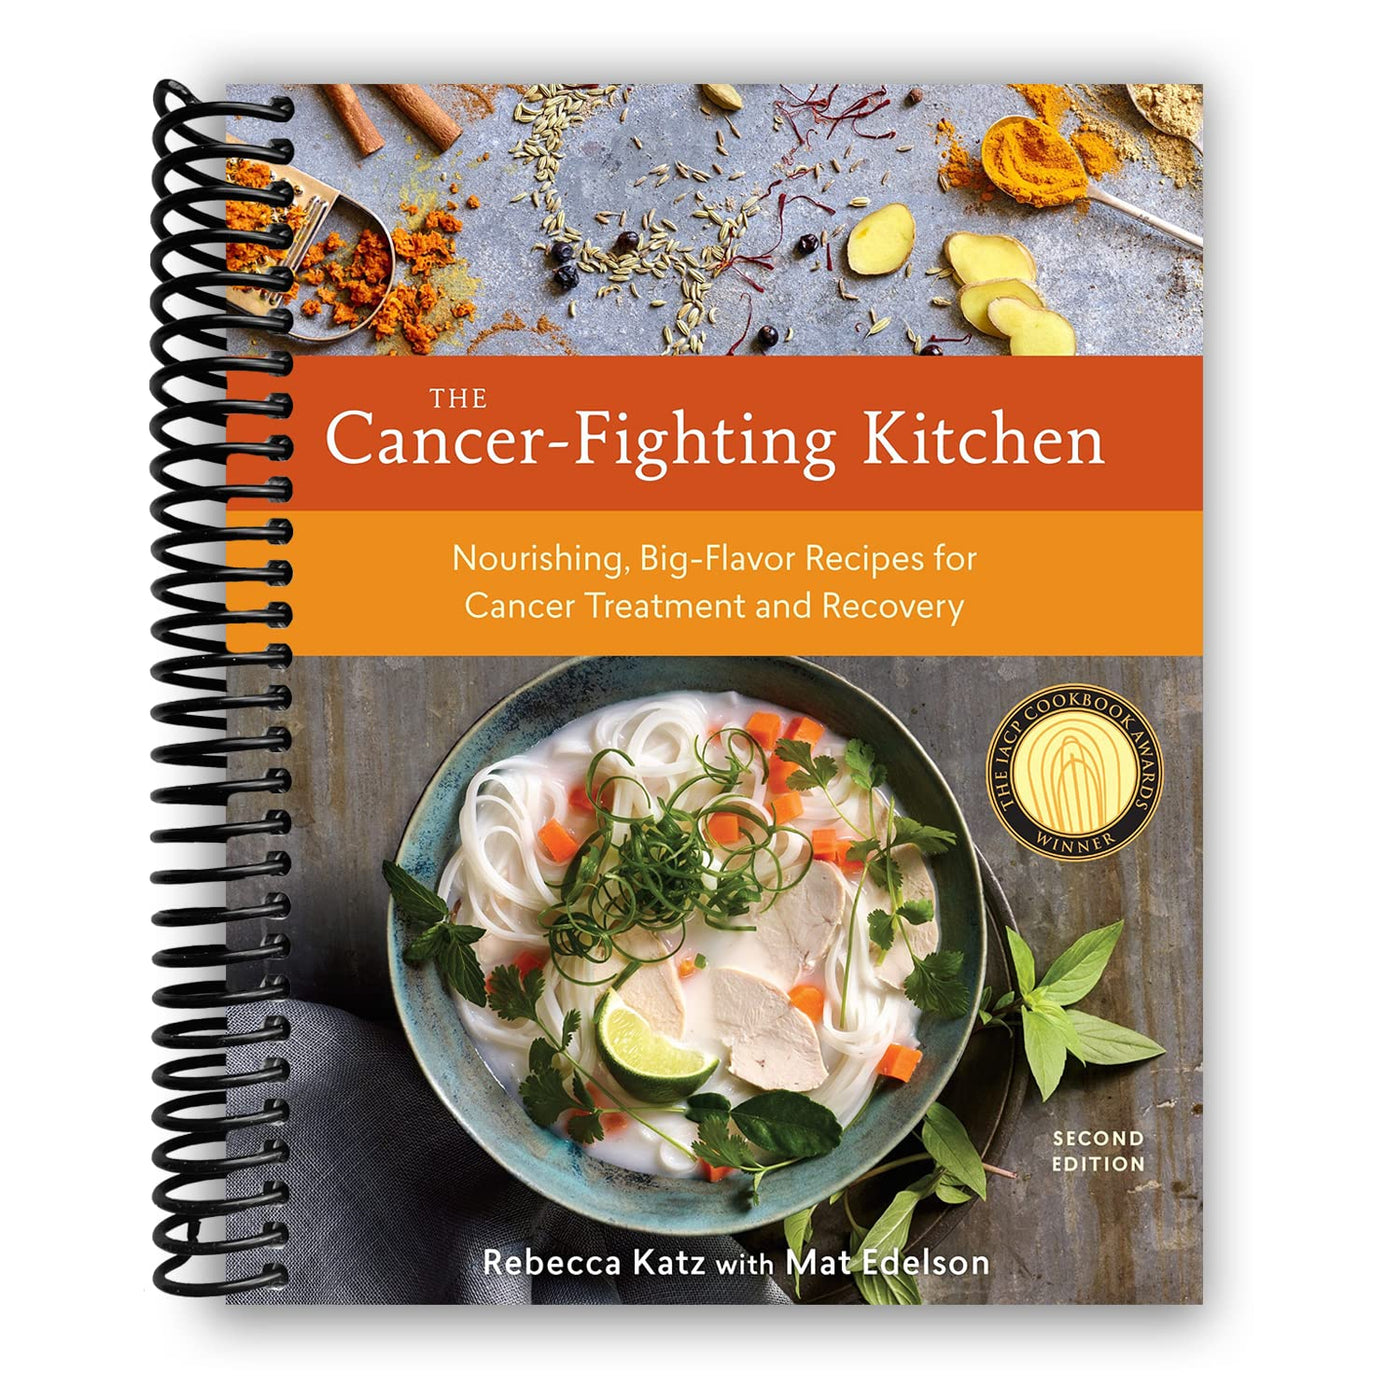 The Cancer-Fighting Kitchen, Second Edition: Nourishing, Big-Flavor Recipes for Cancer Treatment and Recovery (Spiral Bound)